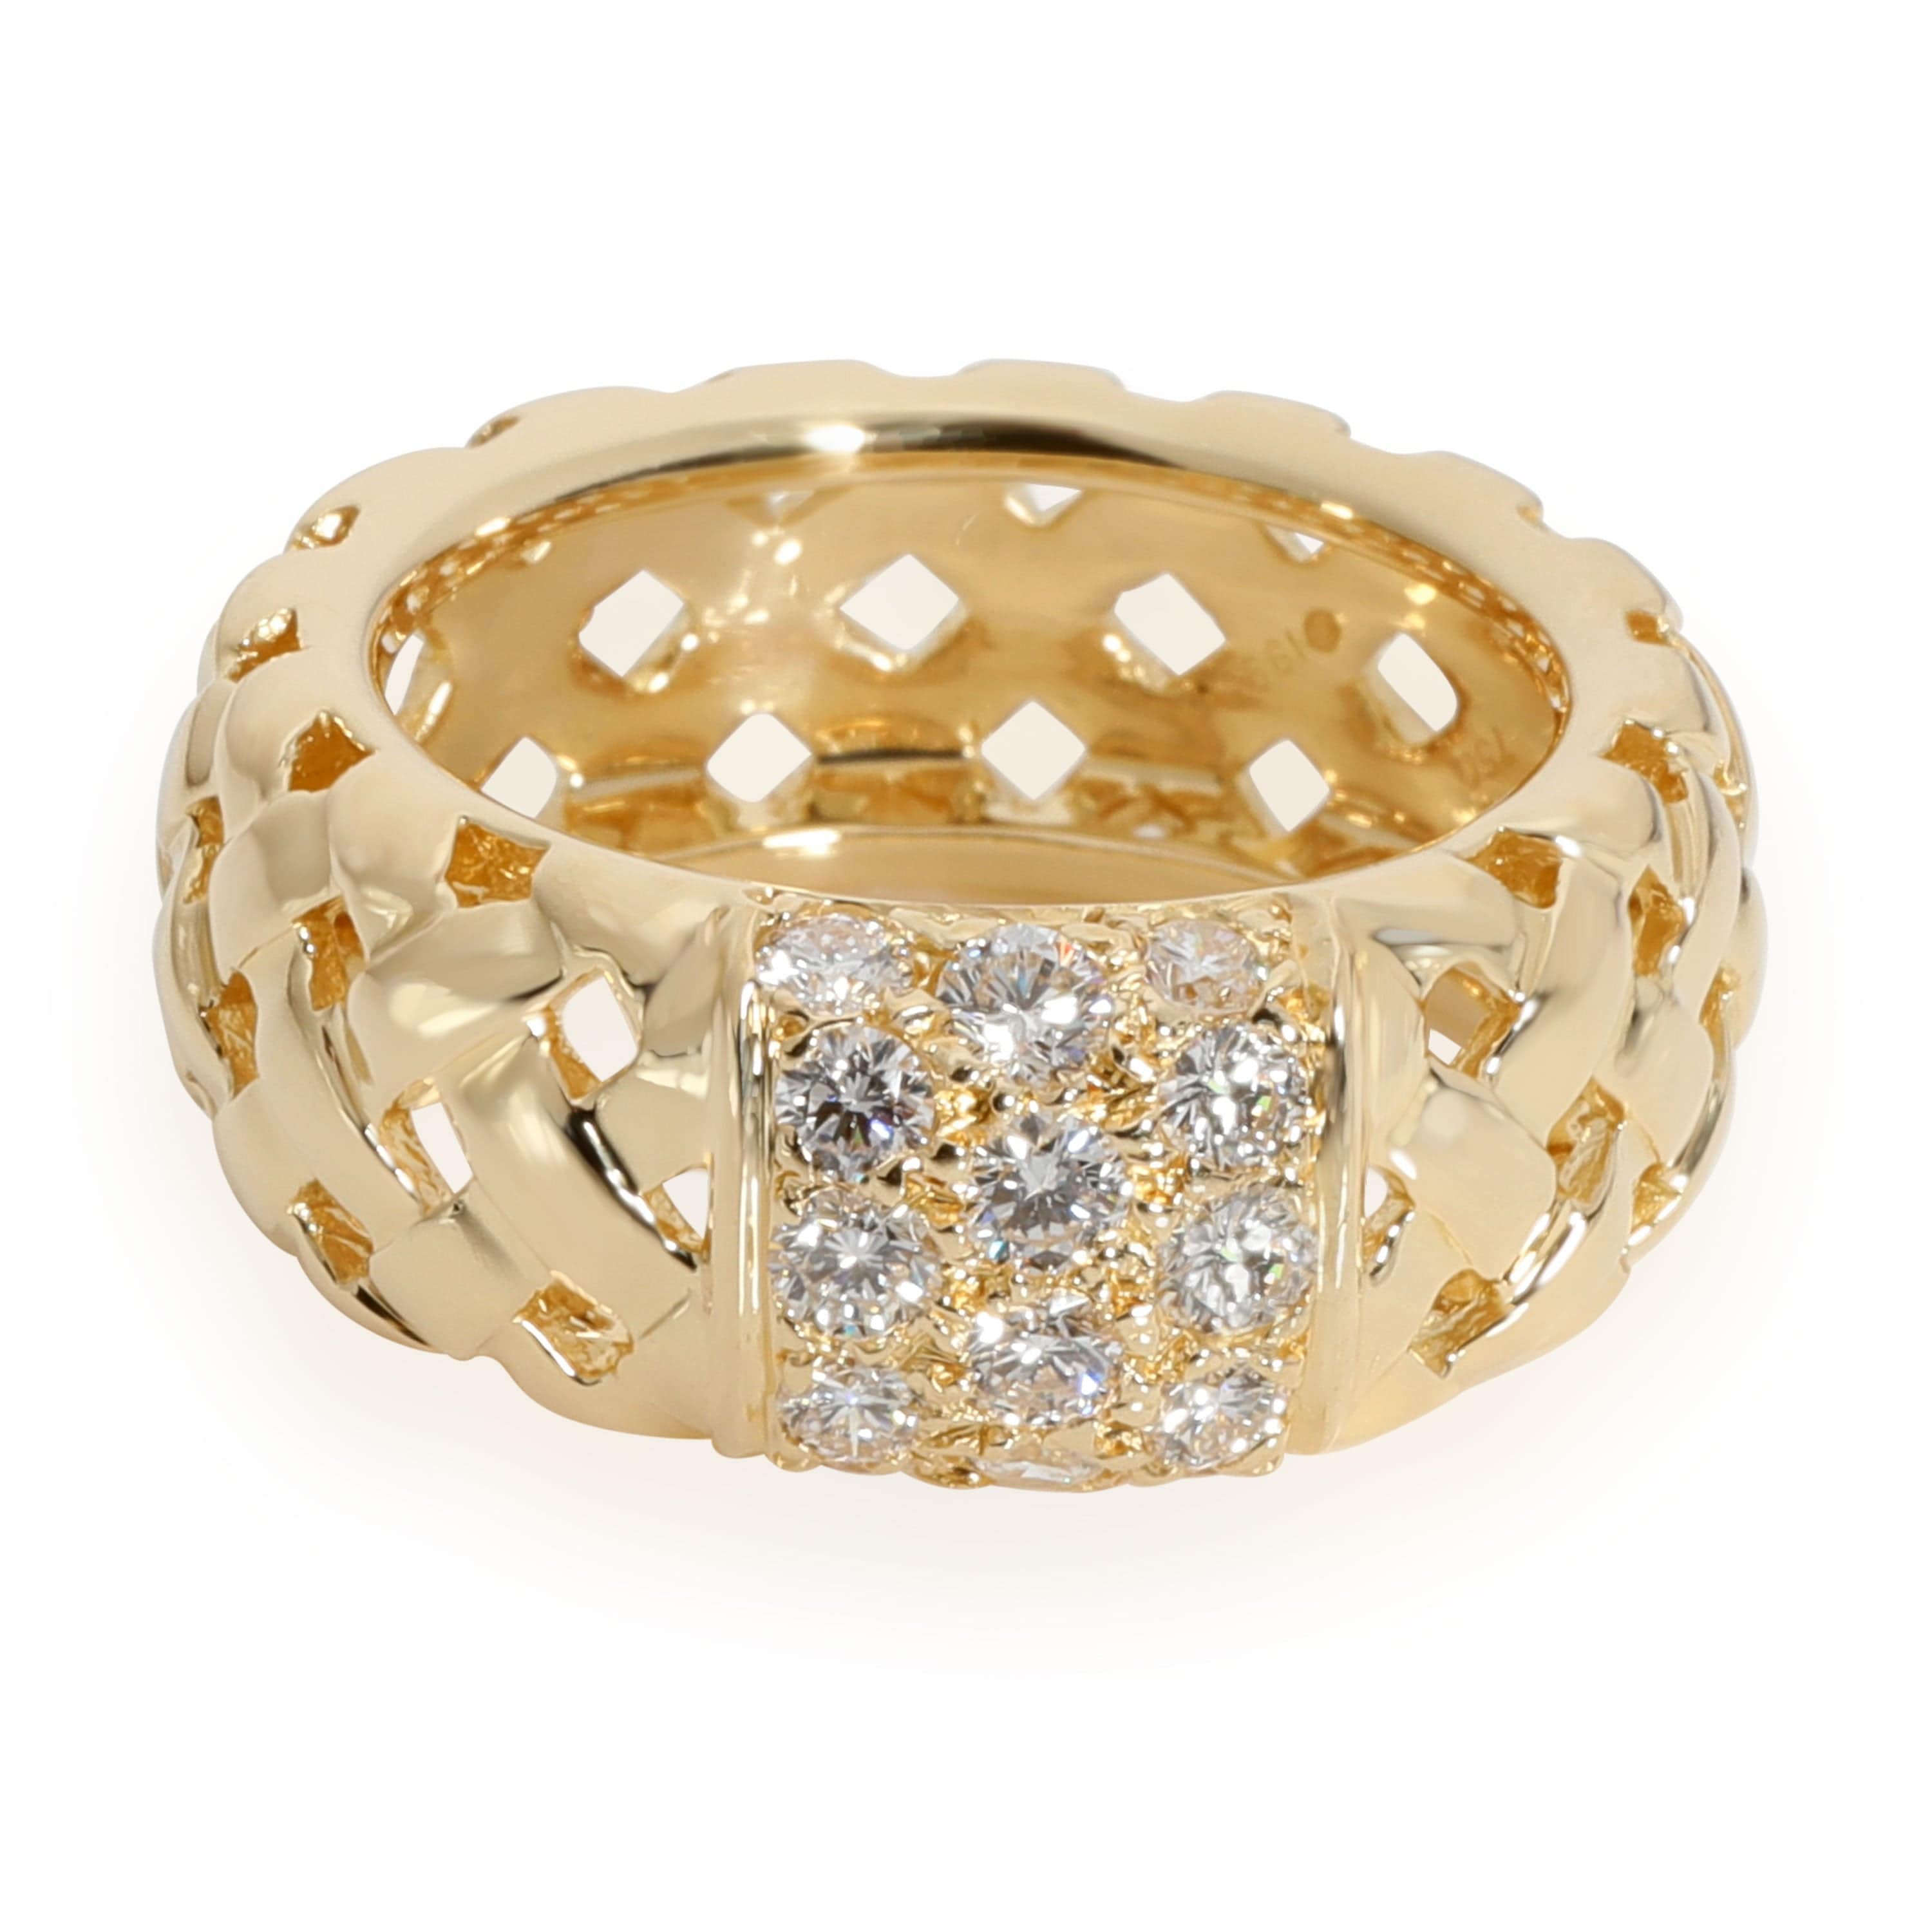 Tiffany & Co. Tiffany & Co. Vannerie Basket Weave Diamond Ring in 18K Yellow Gold 3/4 Ctw